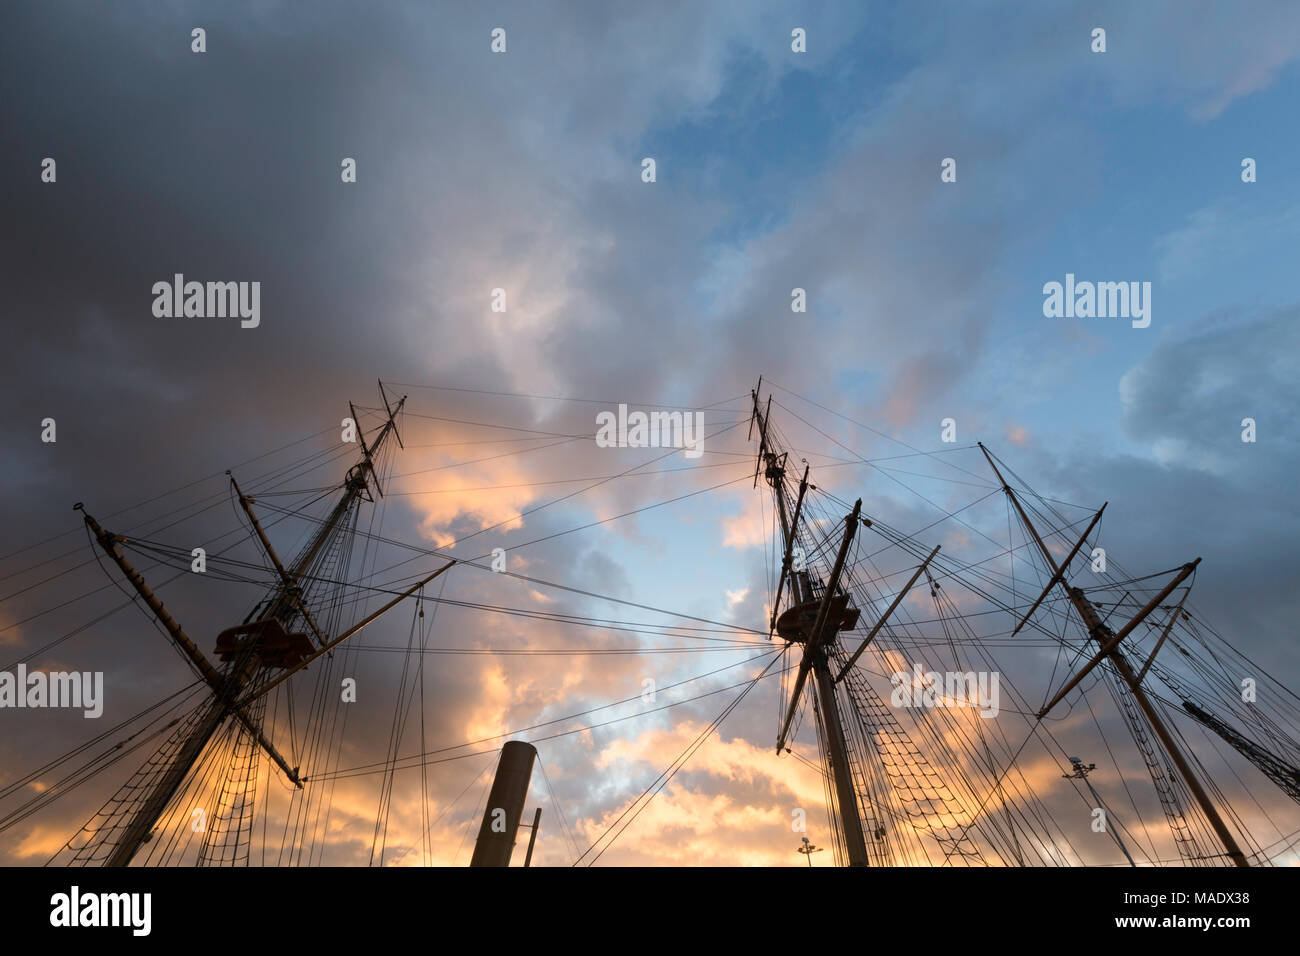 Vibrant orange clouds in a dramatic sky above the wooden masts of HMS Gannet at The Historic Dockyard, Chatham, Kent, UK just before sunset. Stock Photo